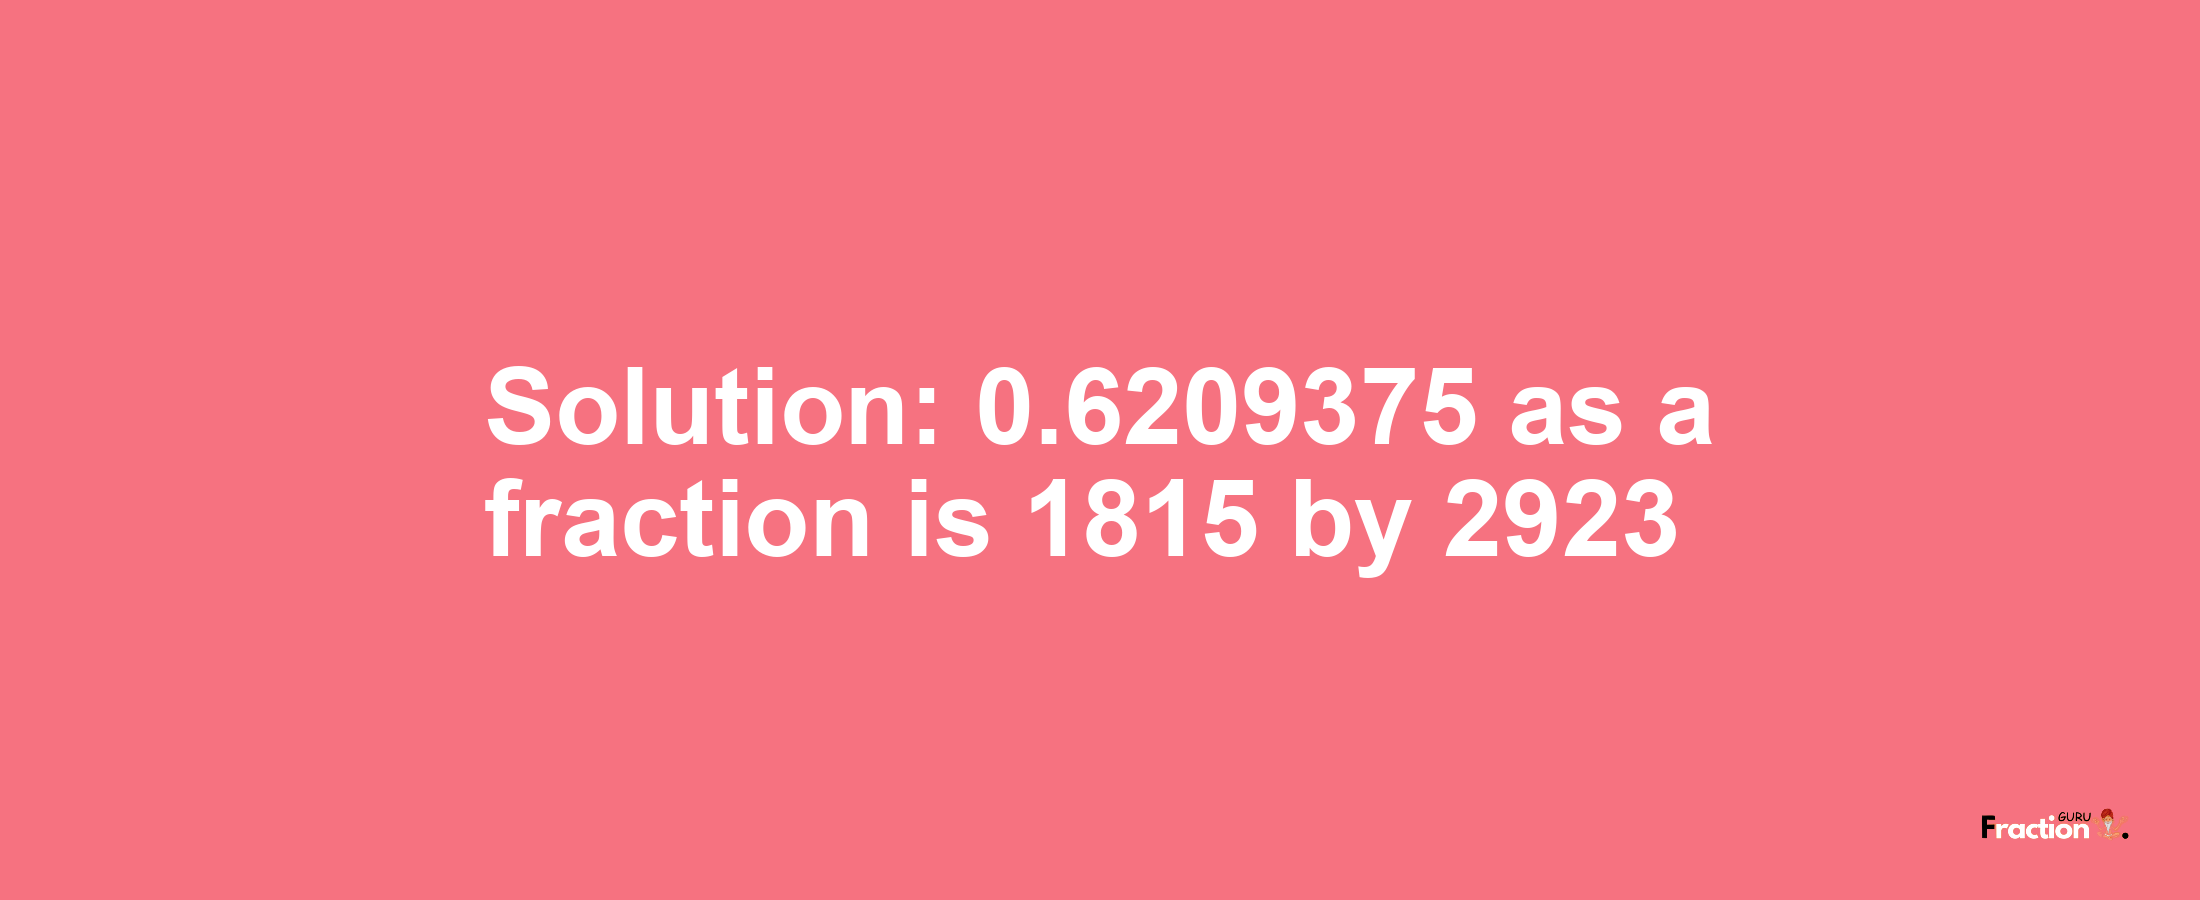 Solution:0.6209375 as a fraction is 1815/2923